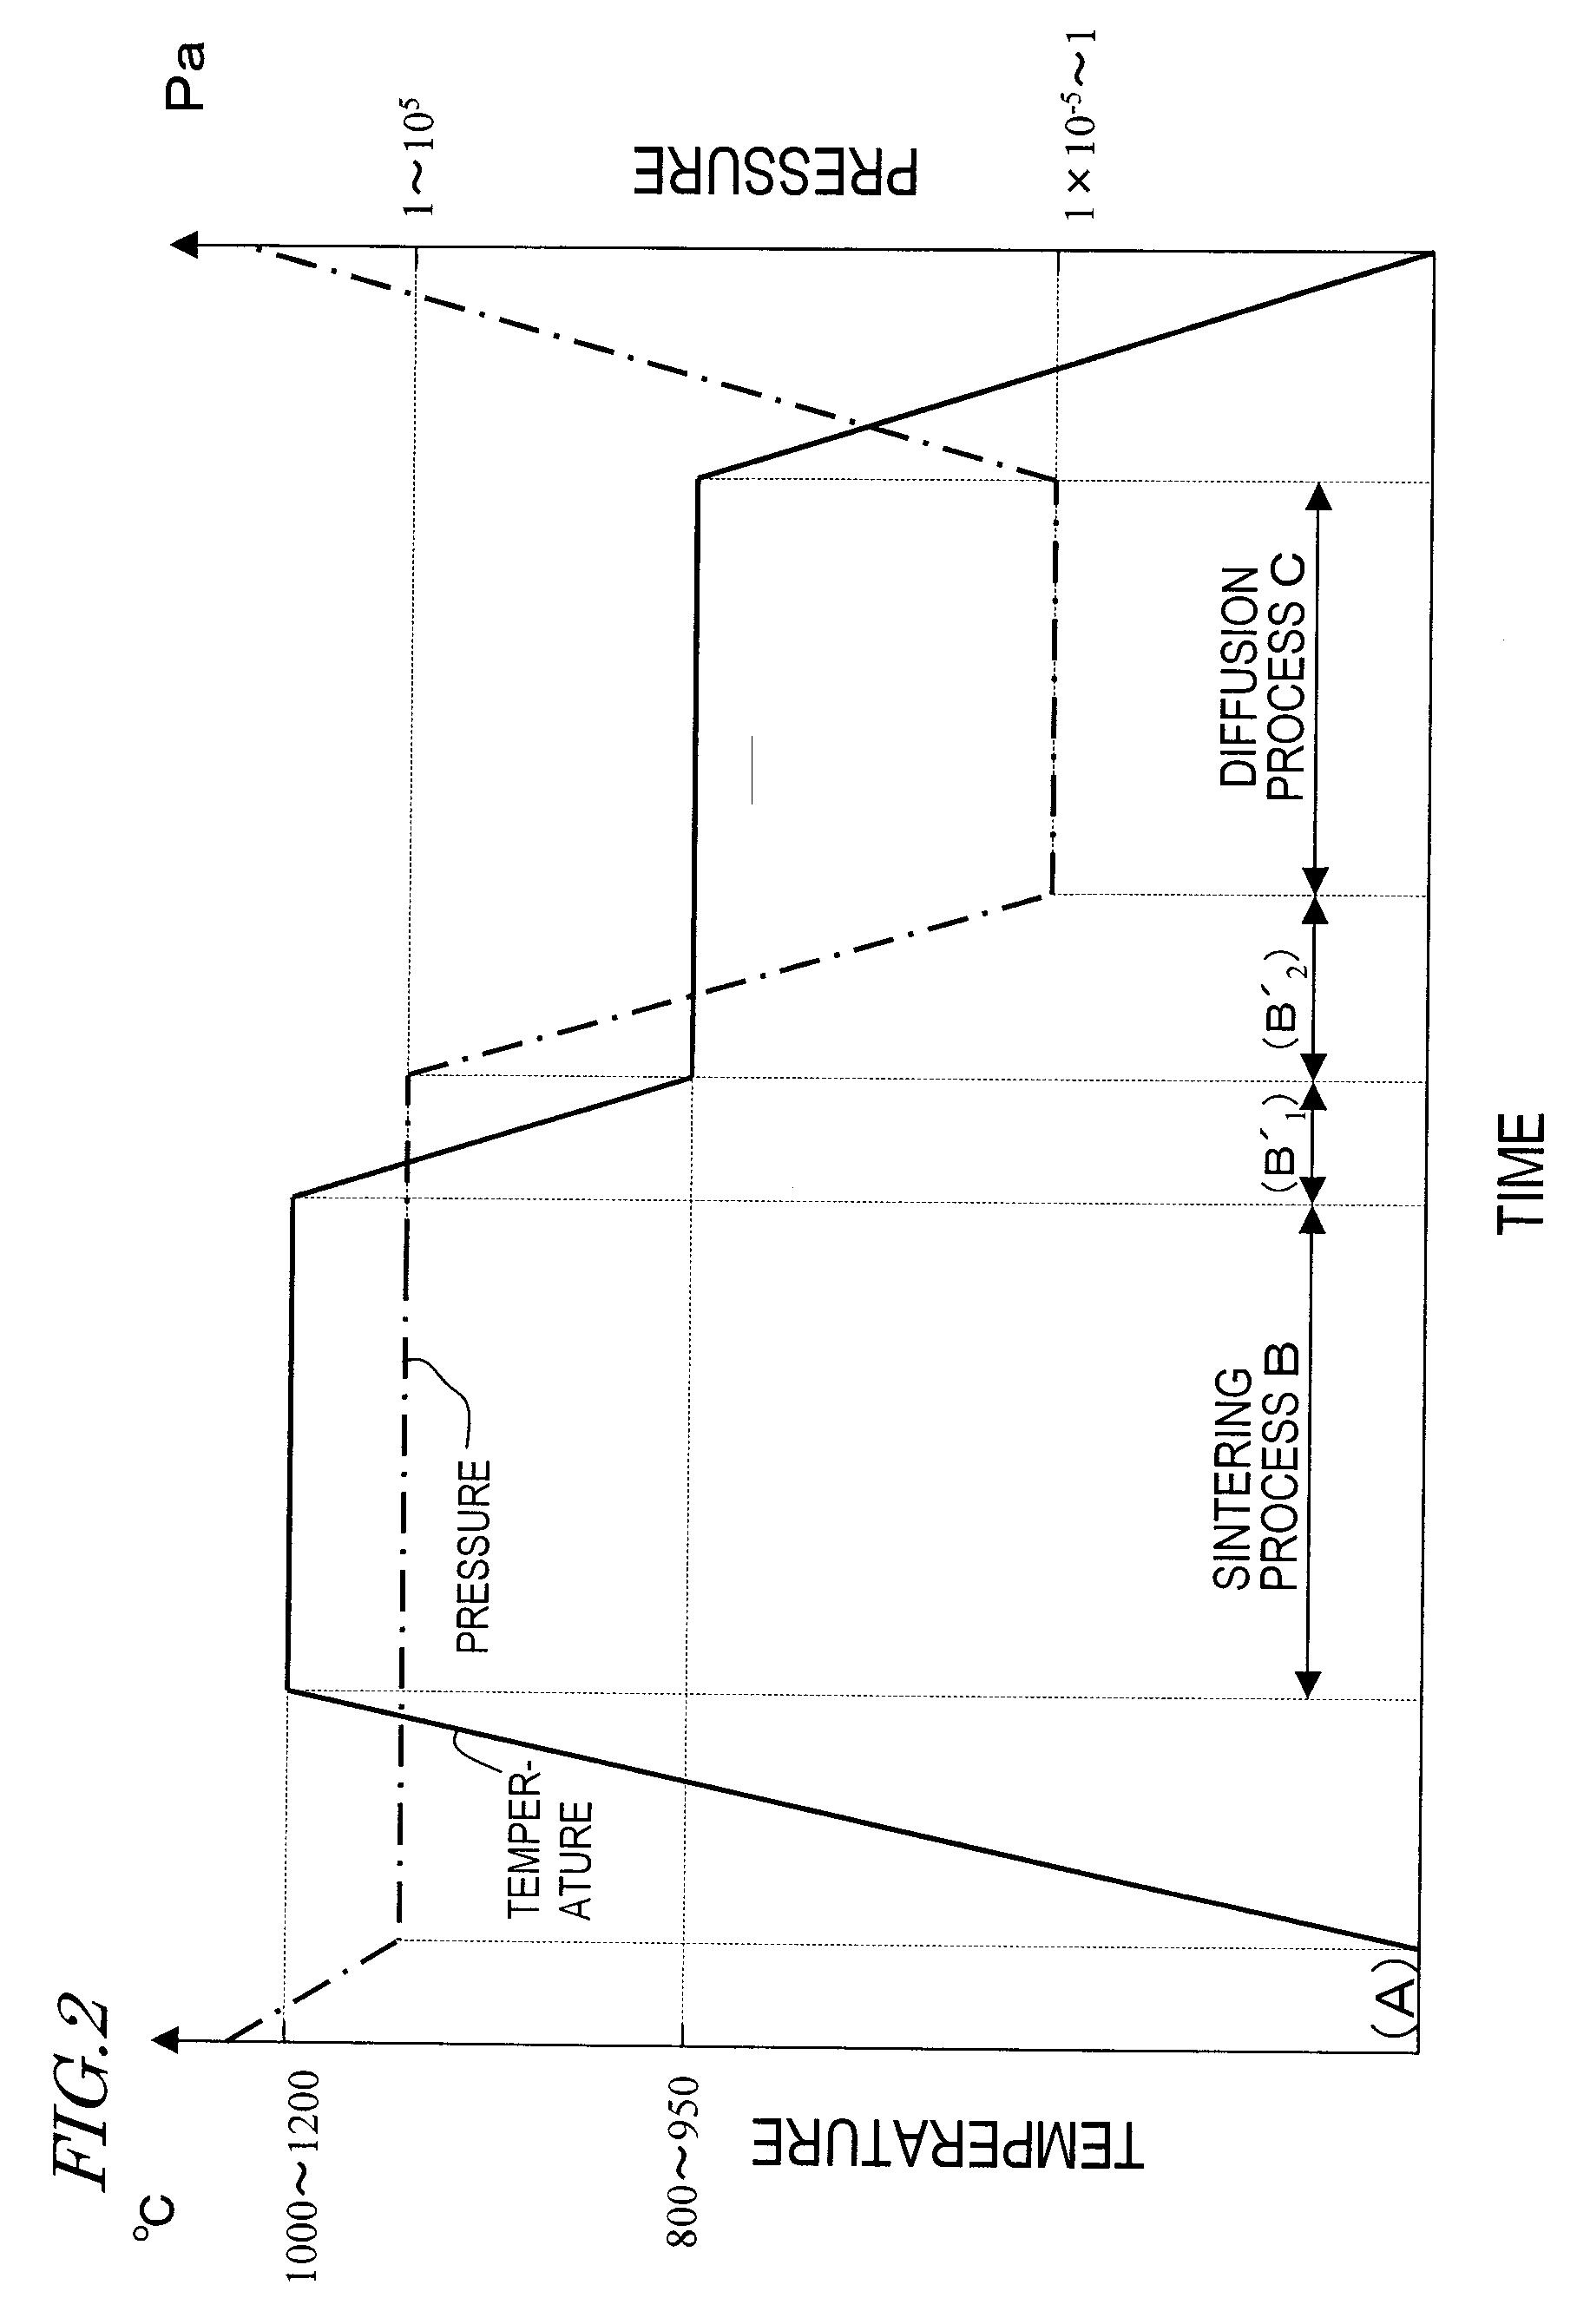 R—Fe—B rare earth sintered magnet and method for producing same